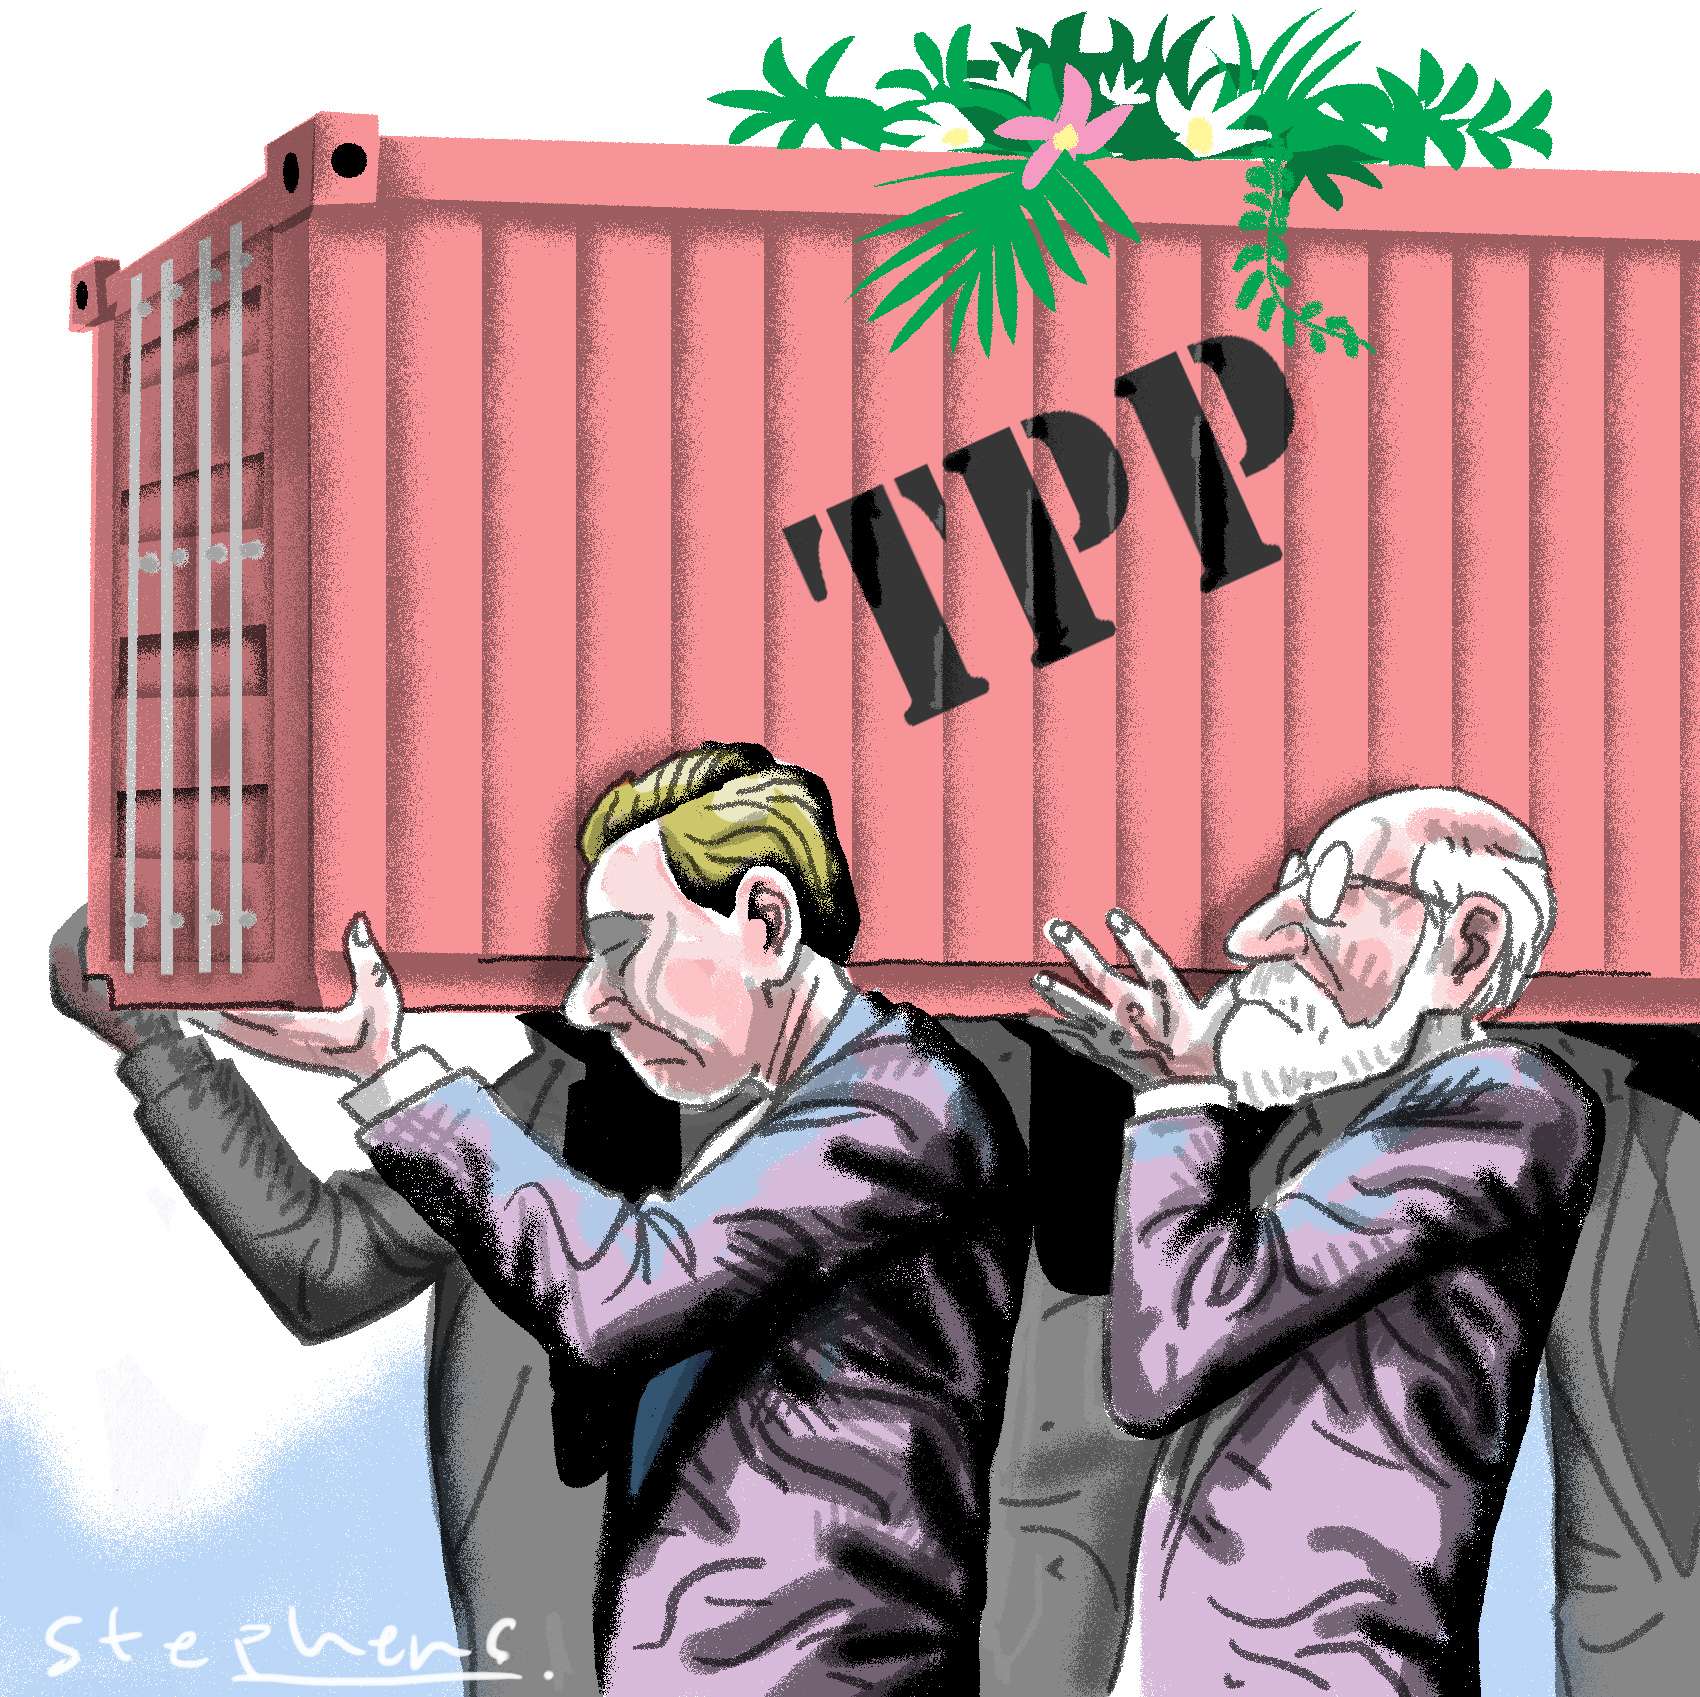 Jean-Pierre Lehmann says if global trade is not to fall into disarray, the TPP, which has been problematic from the start, must be replaced by a wide-ranging new agreement